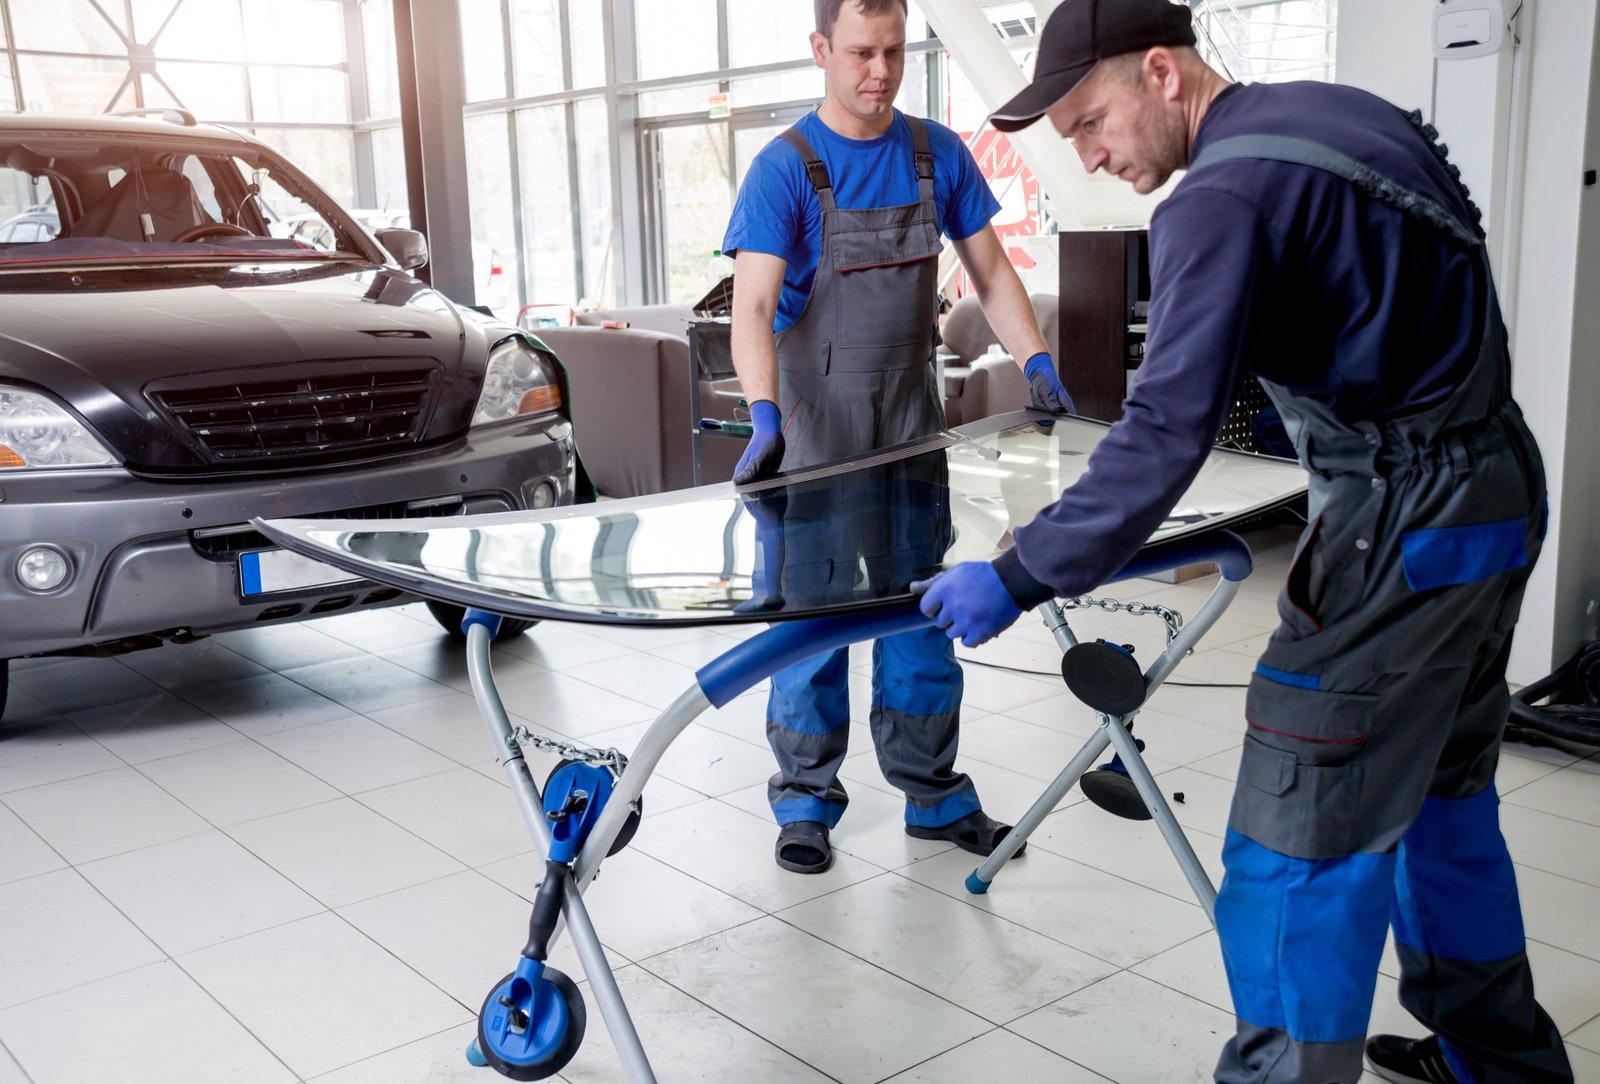 Windshield Repair Tustin CA - Get Auto Glass Repair and Replacement Services with Official Irvine Auto Glass